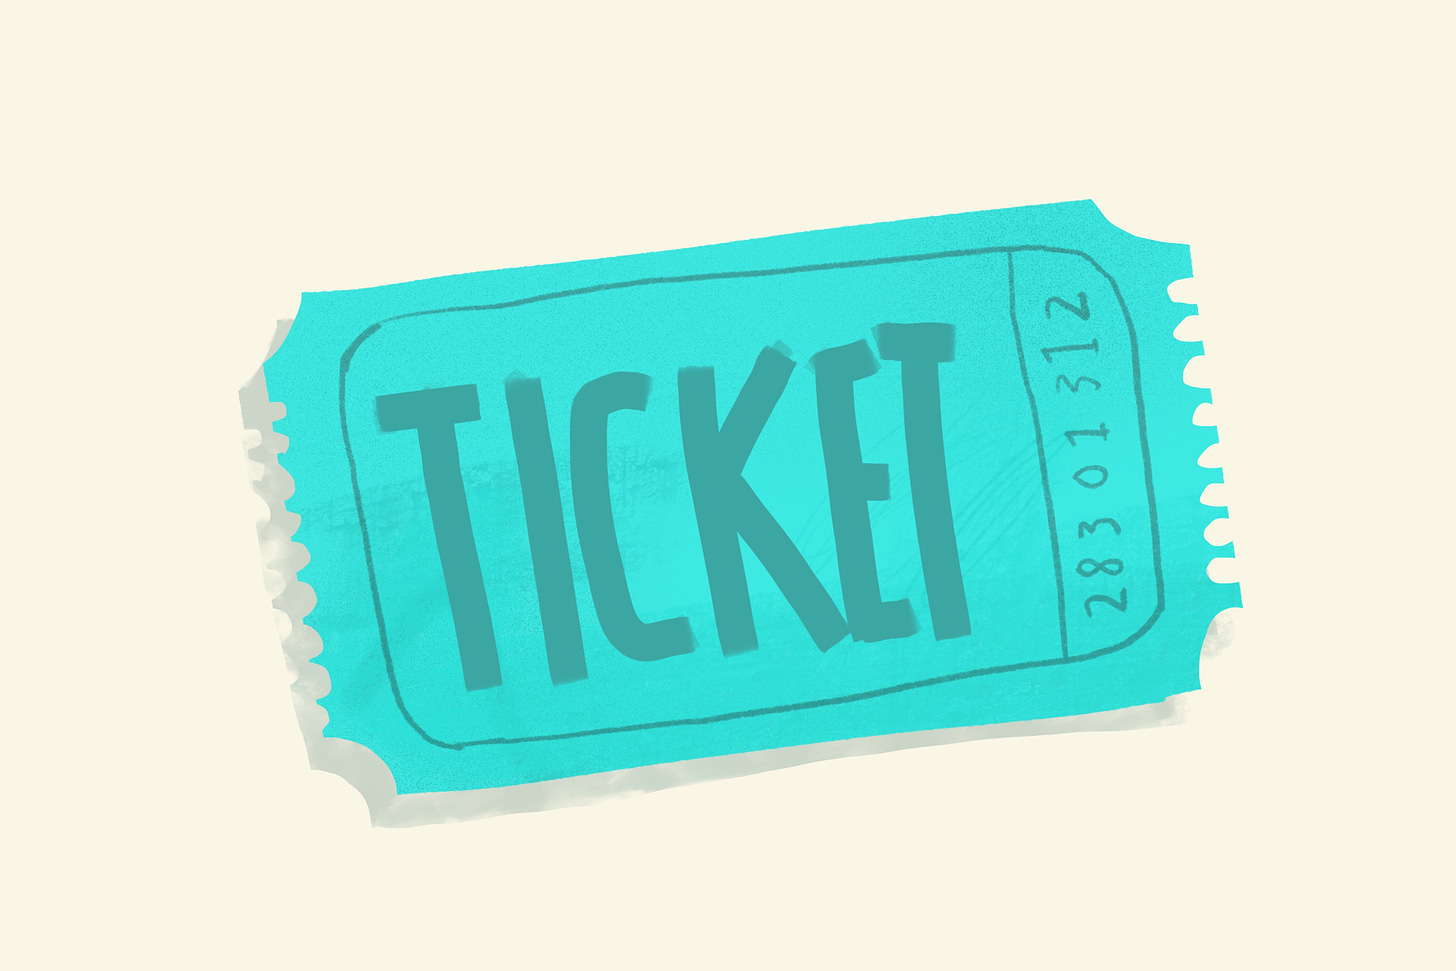 An illustration of a ticket by Adam Ming illustrator